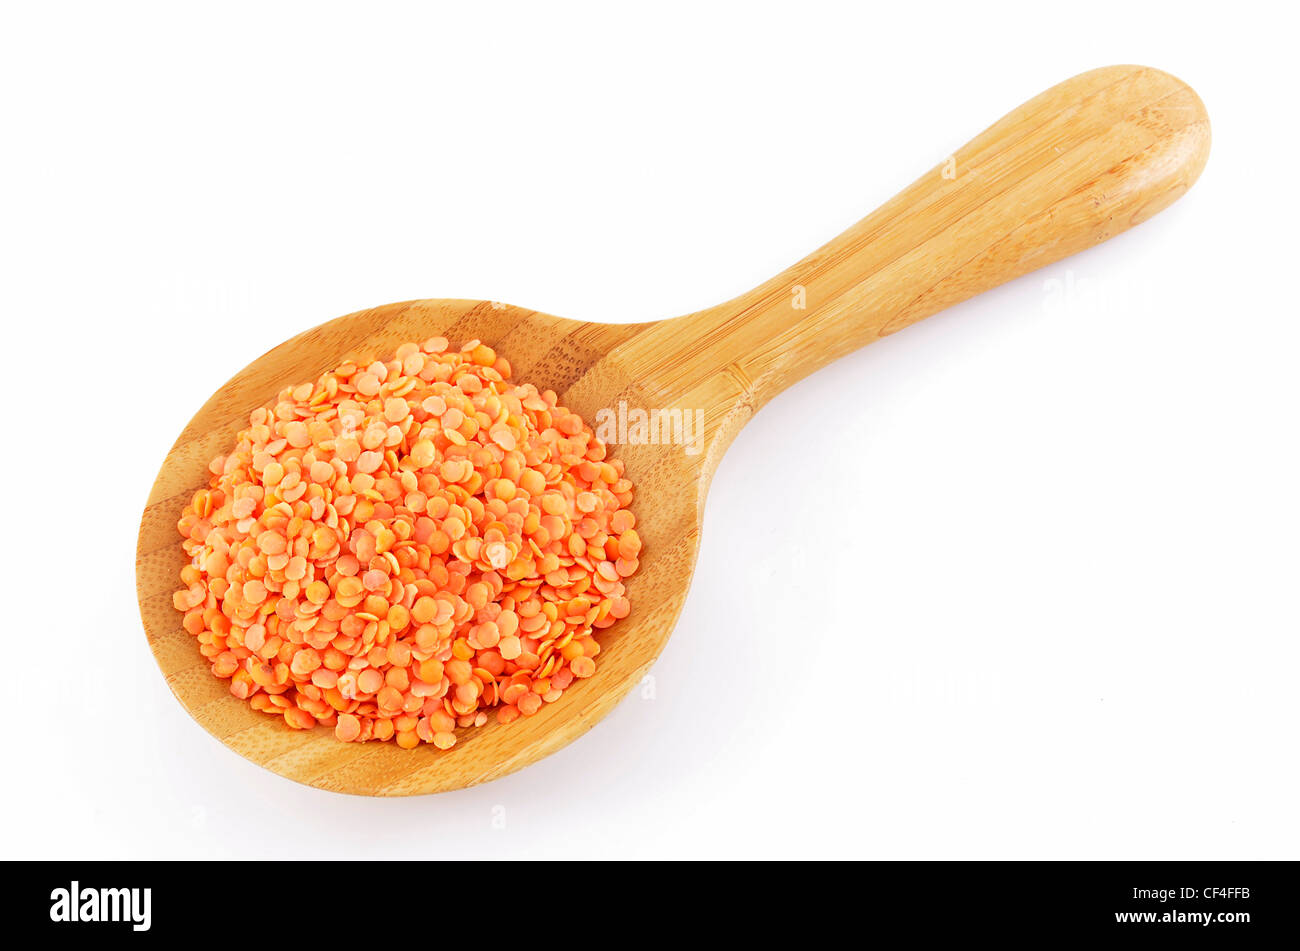 Red lentils in wooden spoon on white background Stock Photo